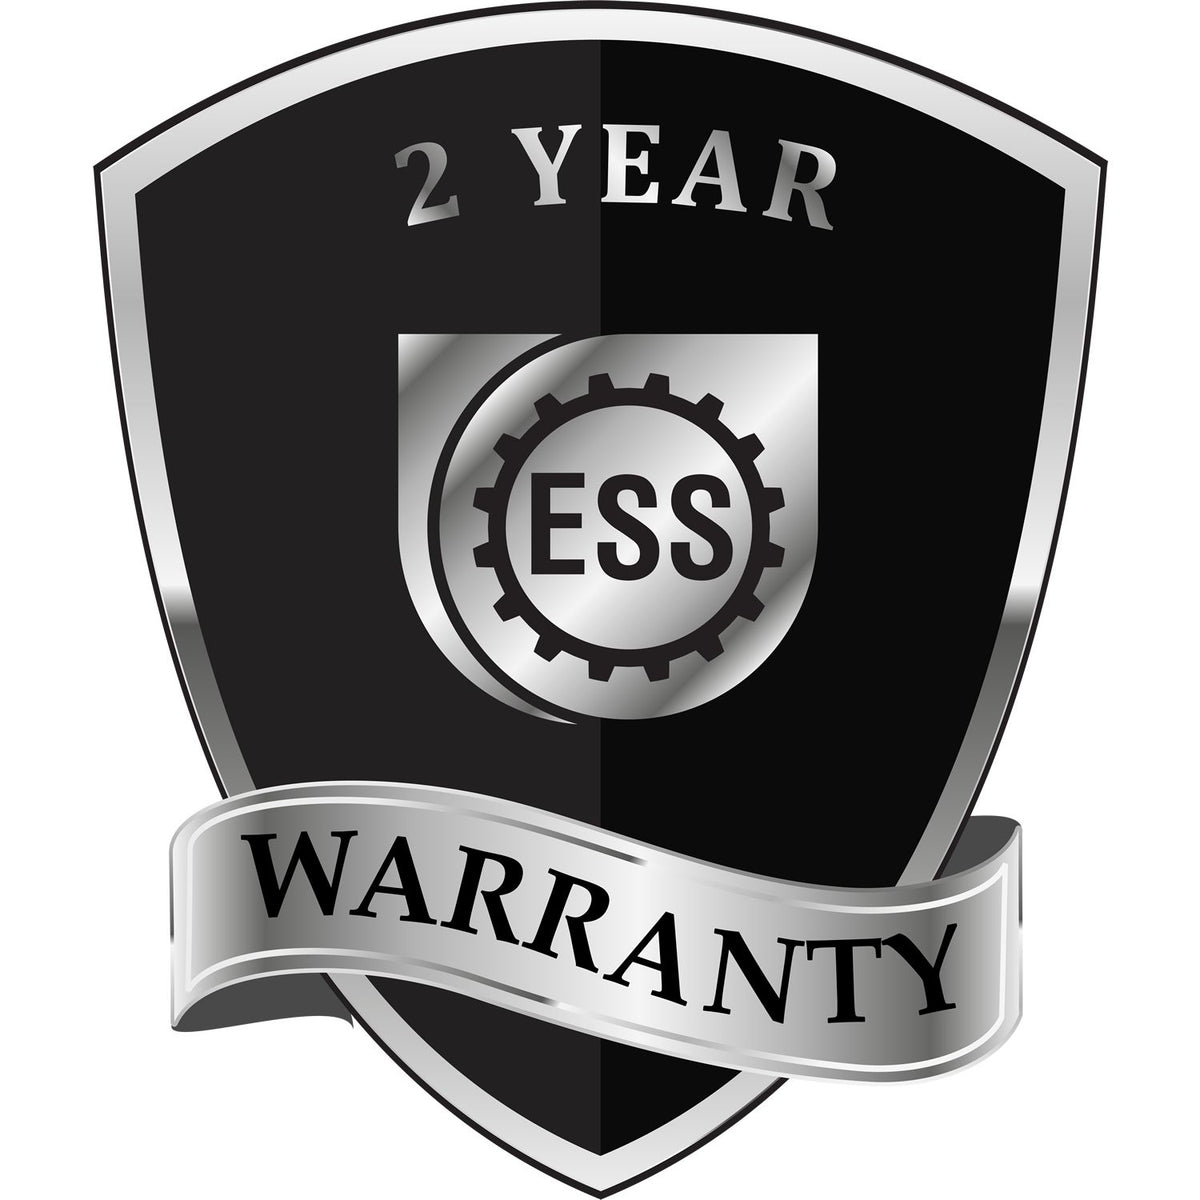 A black and silver badge or emblem showing warranty information for the Montana Geologist Desk Seal